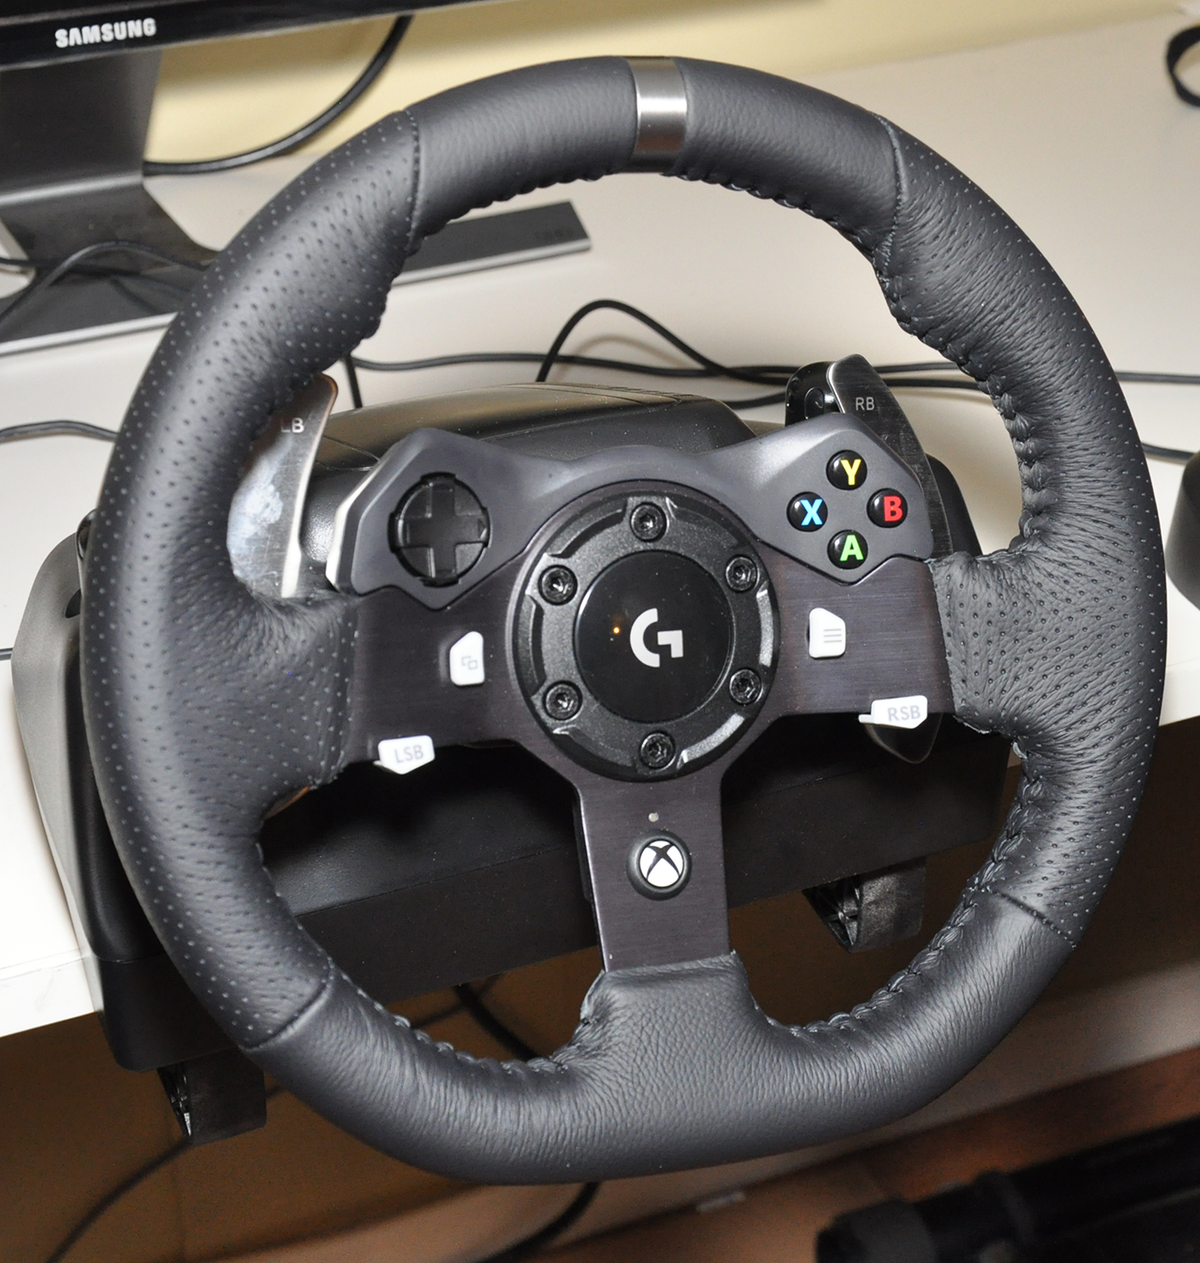 Buy Online Logitech G920 Driving Force Racing Wheel For Xbox and